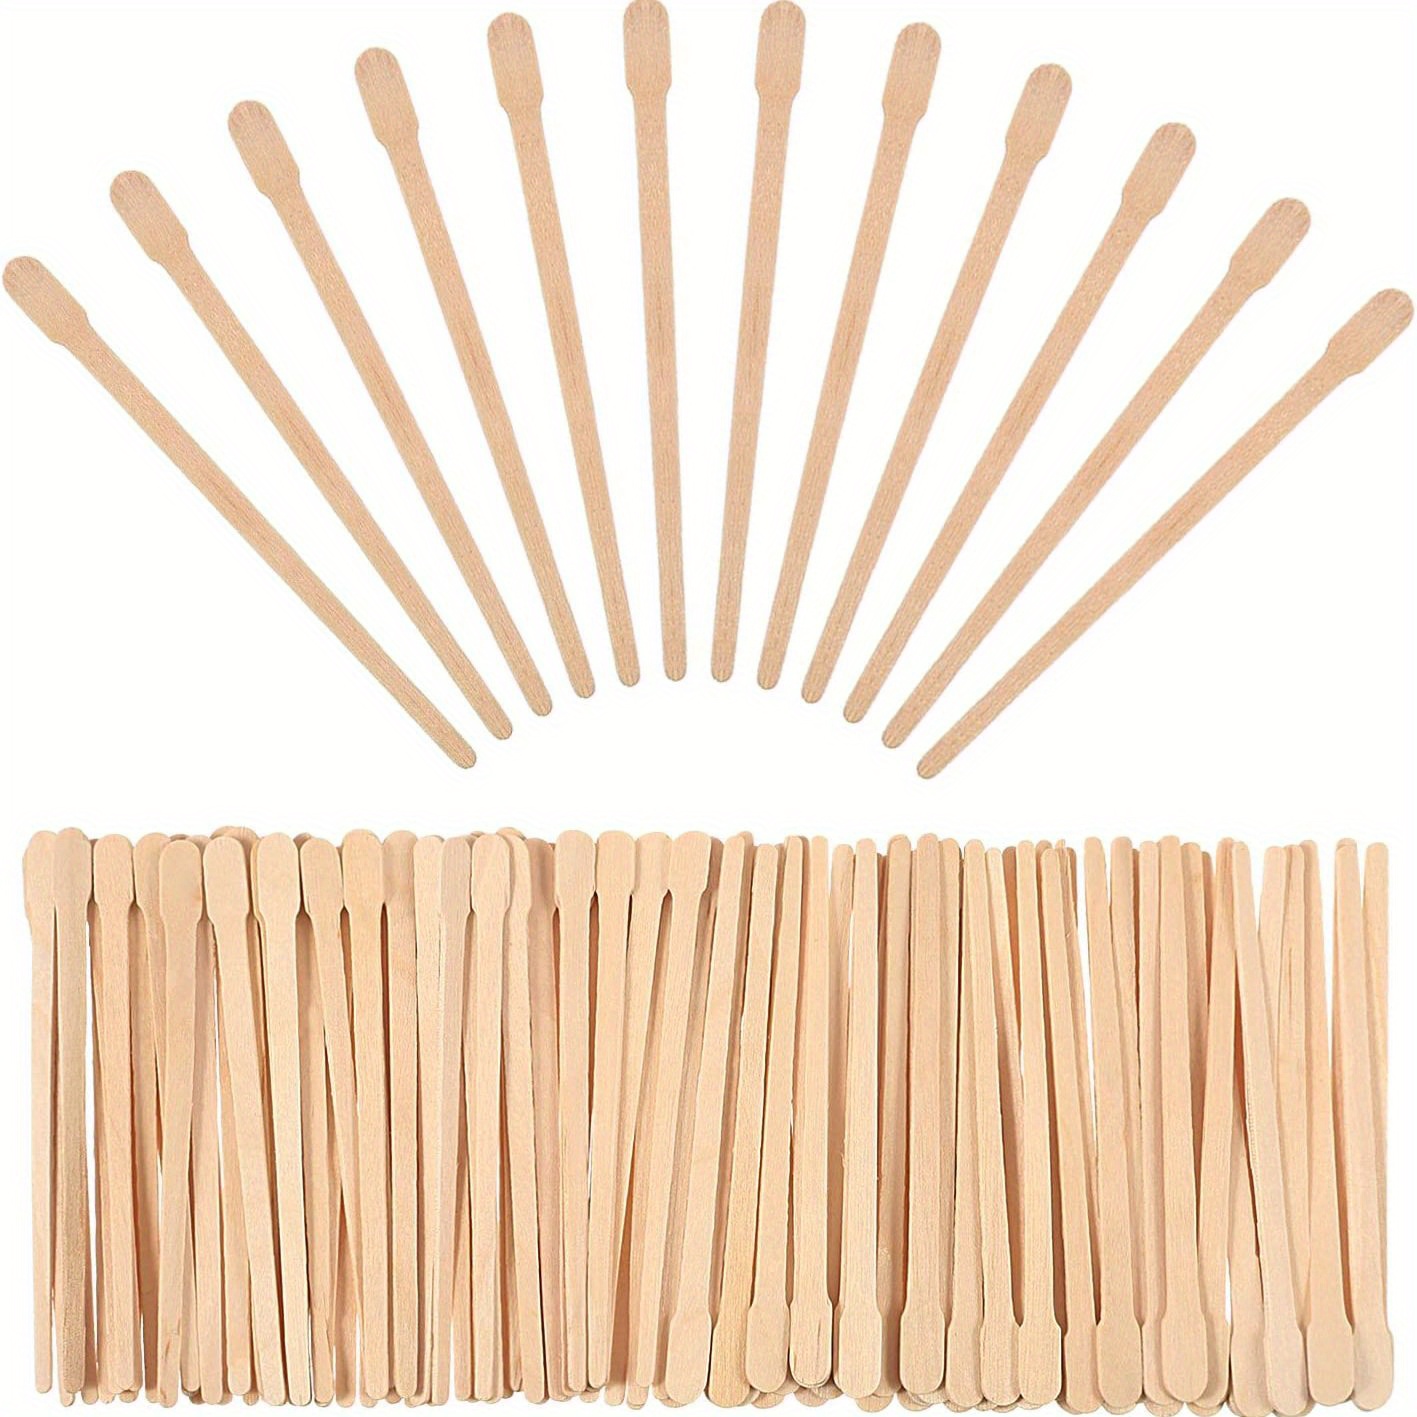  1000 Pcs Wooden Wax Sticks - Round Waxing Applicator Sticks -  Lip Nose Eyebrow Waxing Spatulas Sticks - Wood Double Sided Sticks for Hair  Removal Skin Spa Home Use Facial